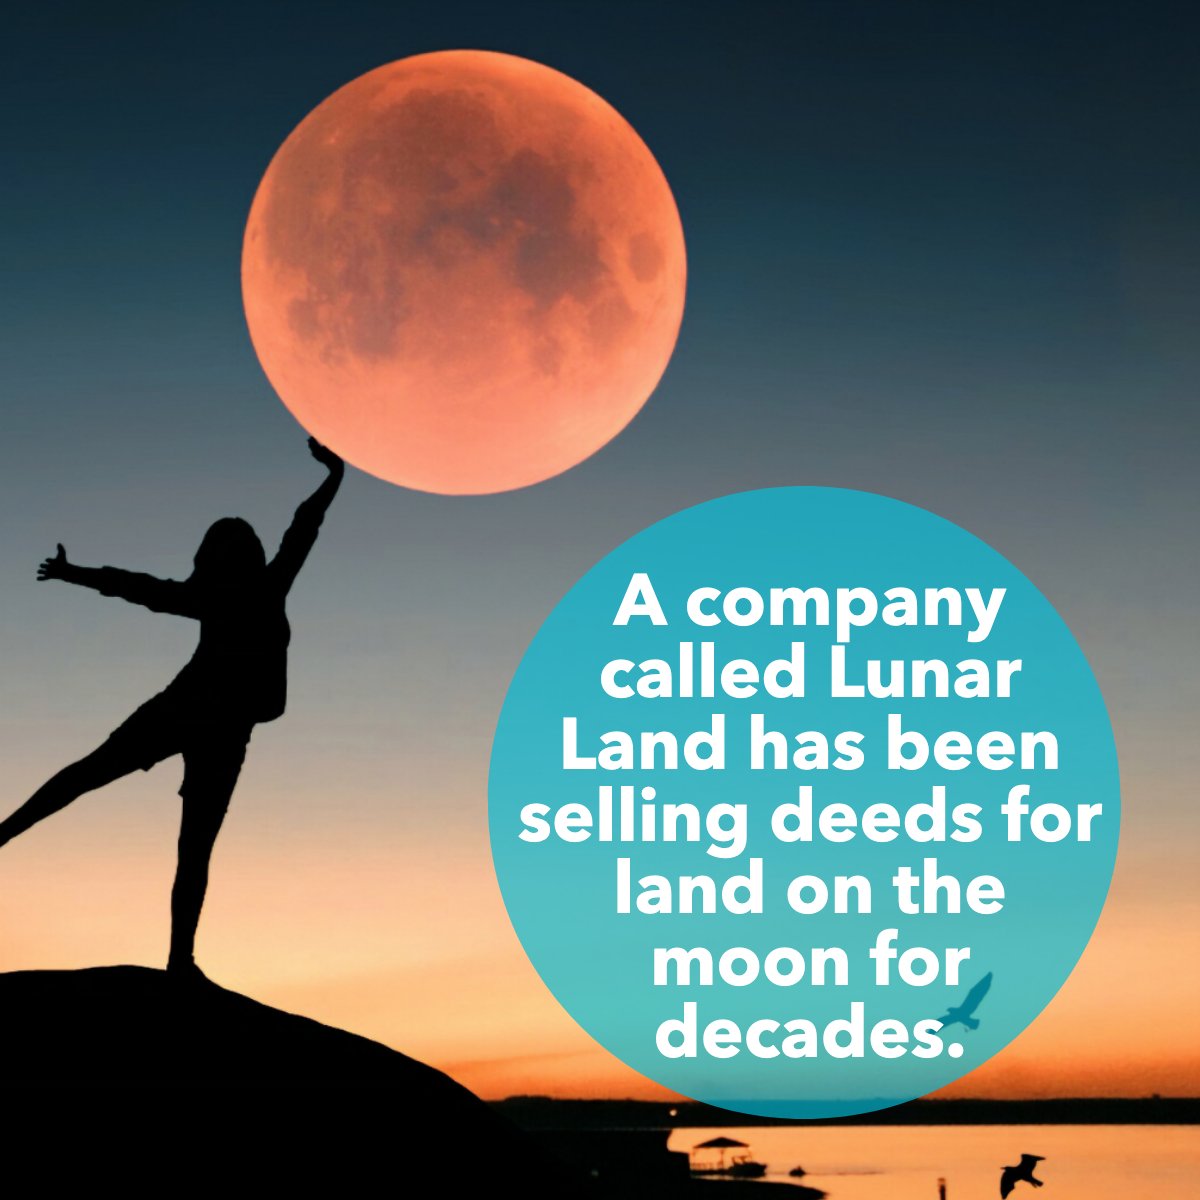 What do you think? 🤔

LUNAR LAND company is the world's most recognized Celestial Real Estate Agency 🚀

#didyouknow #fact #celestial #lunarland #goodtoknow #randomfact #realestate #realestate101
 #BorahRealtySource #Borahsdiditagain #Borahsoldit #bestteamintown